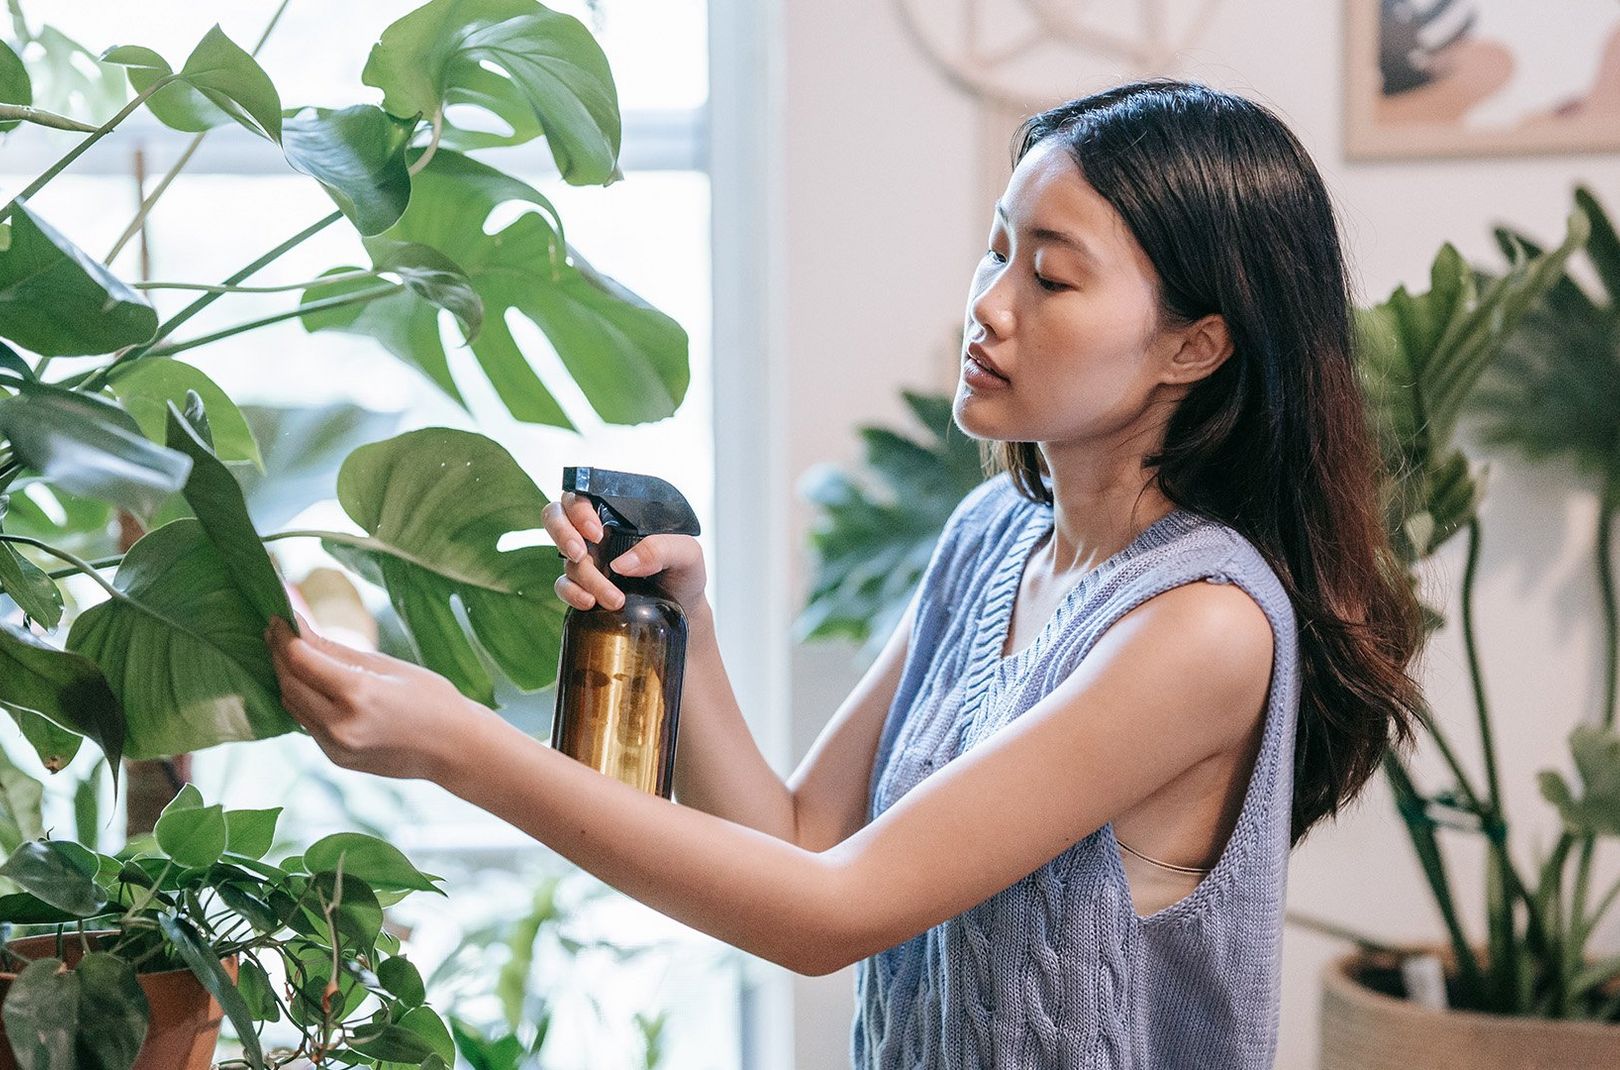 A picture of someone watering their plants